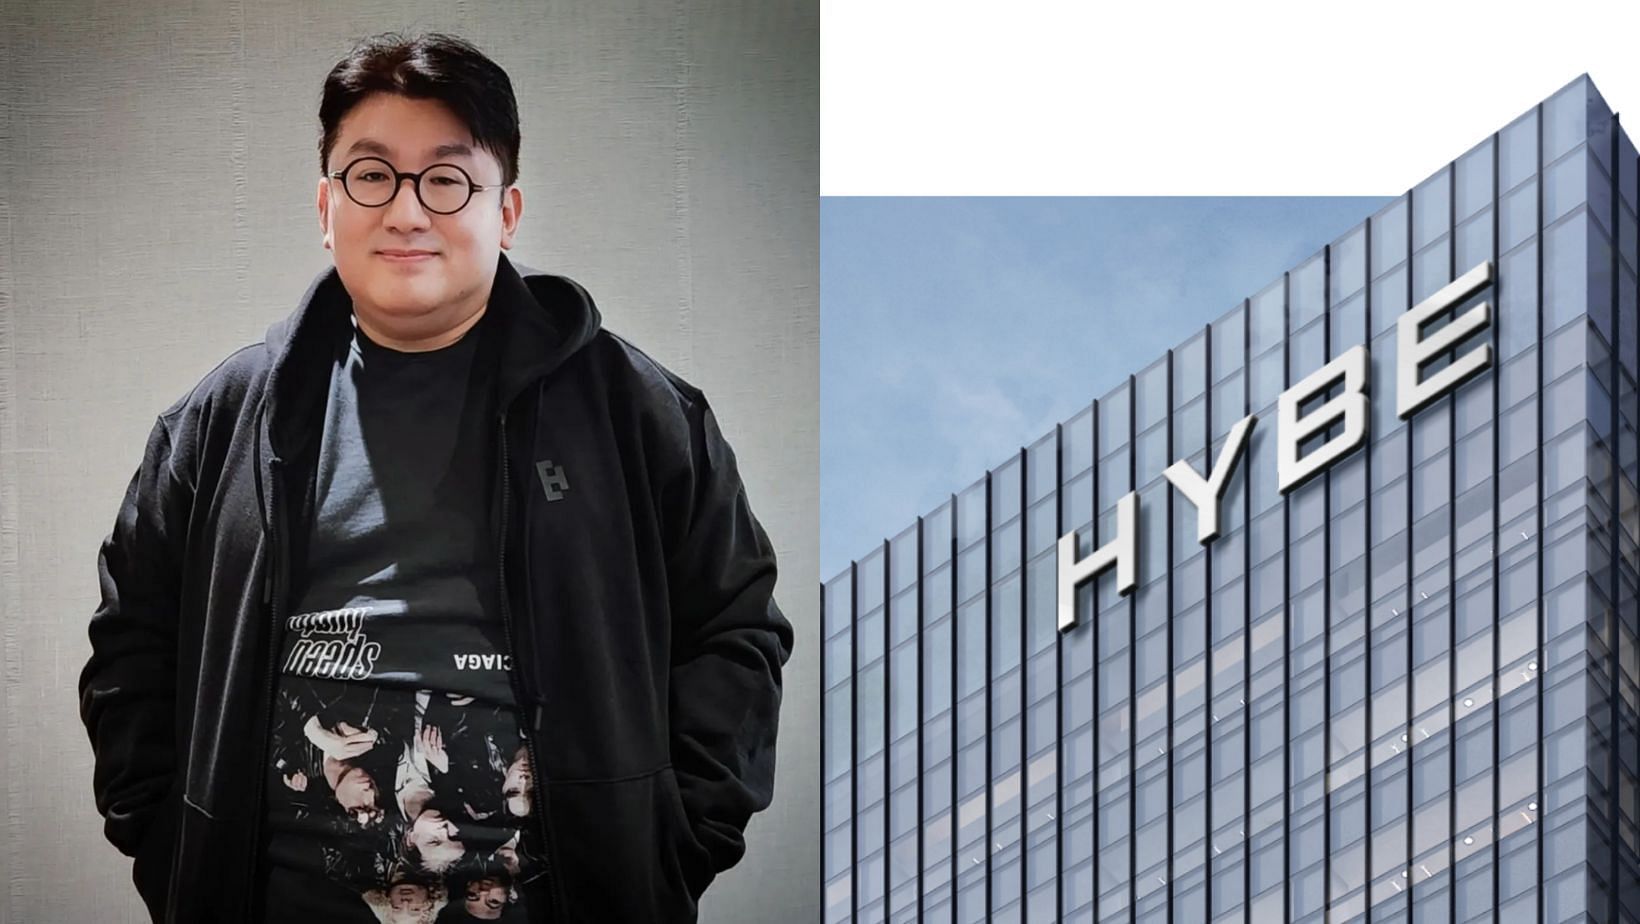 HYBE founder Bang Si-hyuk to receive less than KRW 1 ($0.00076) for 2024. (Images via Instagram/@ hitmanb72 and HYBE website)